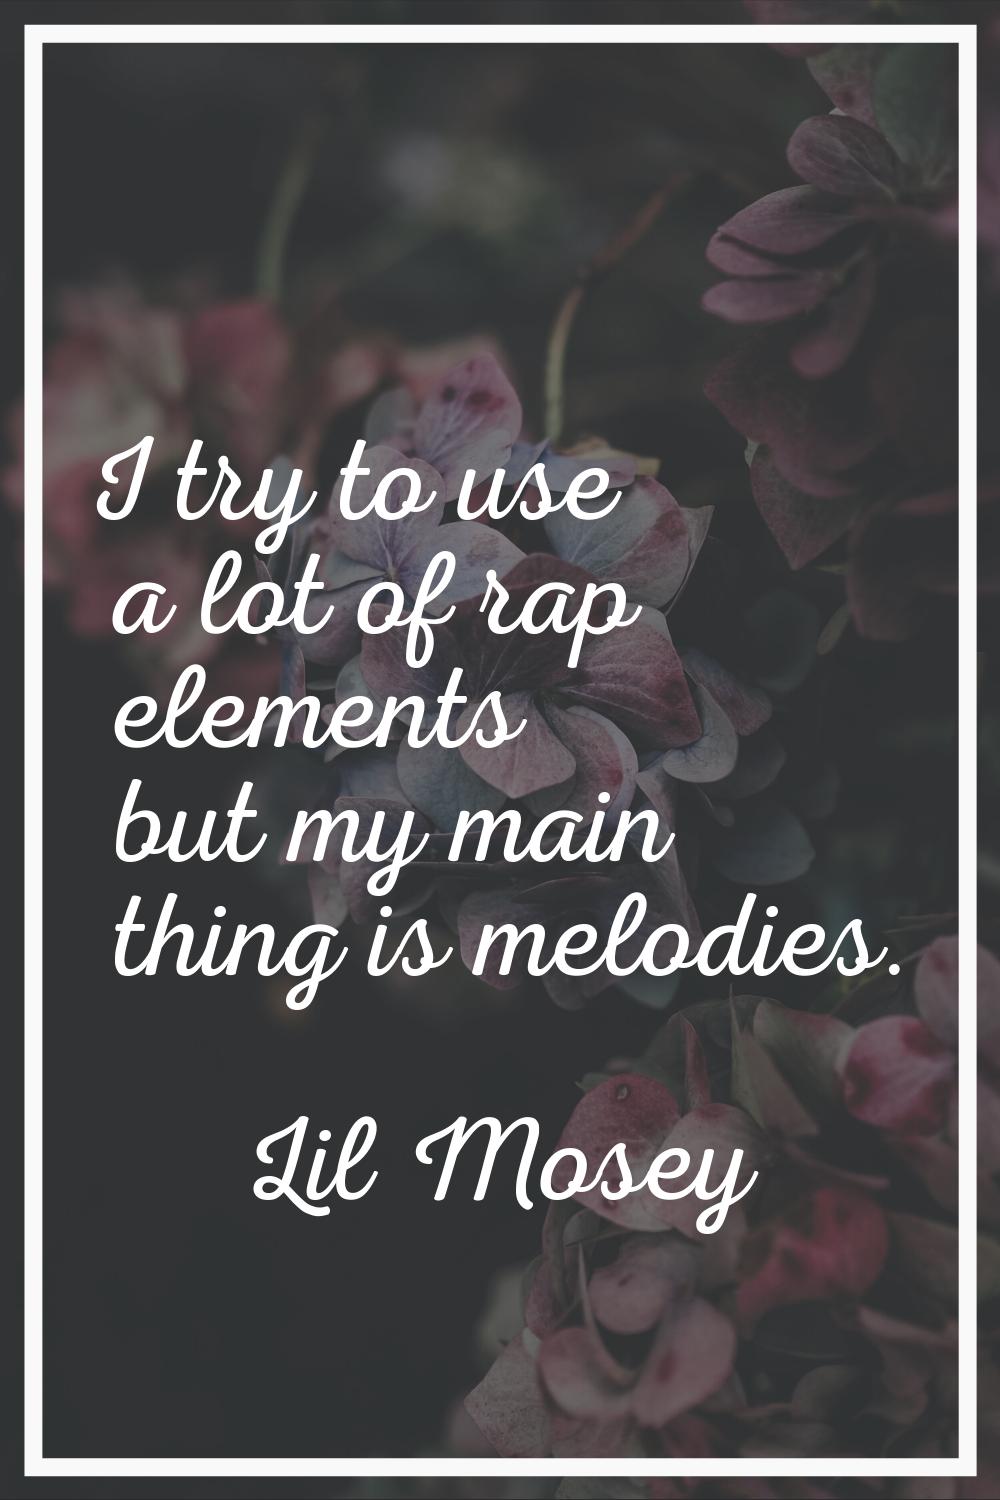 I try to use a lot of rap elements but my main thing is melodies.